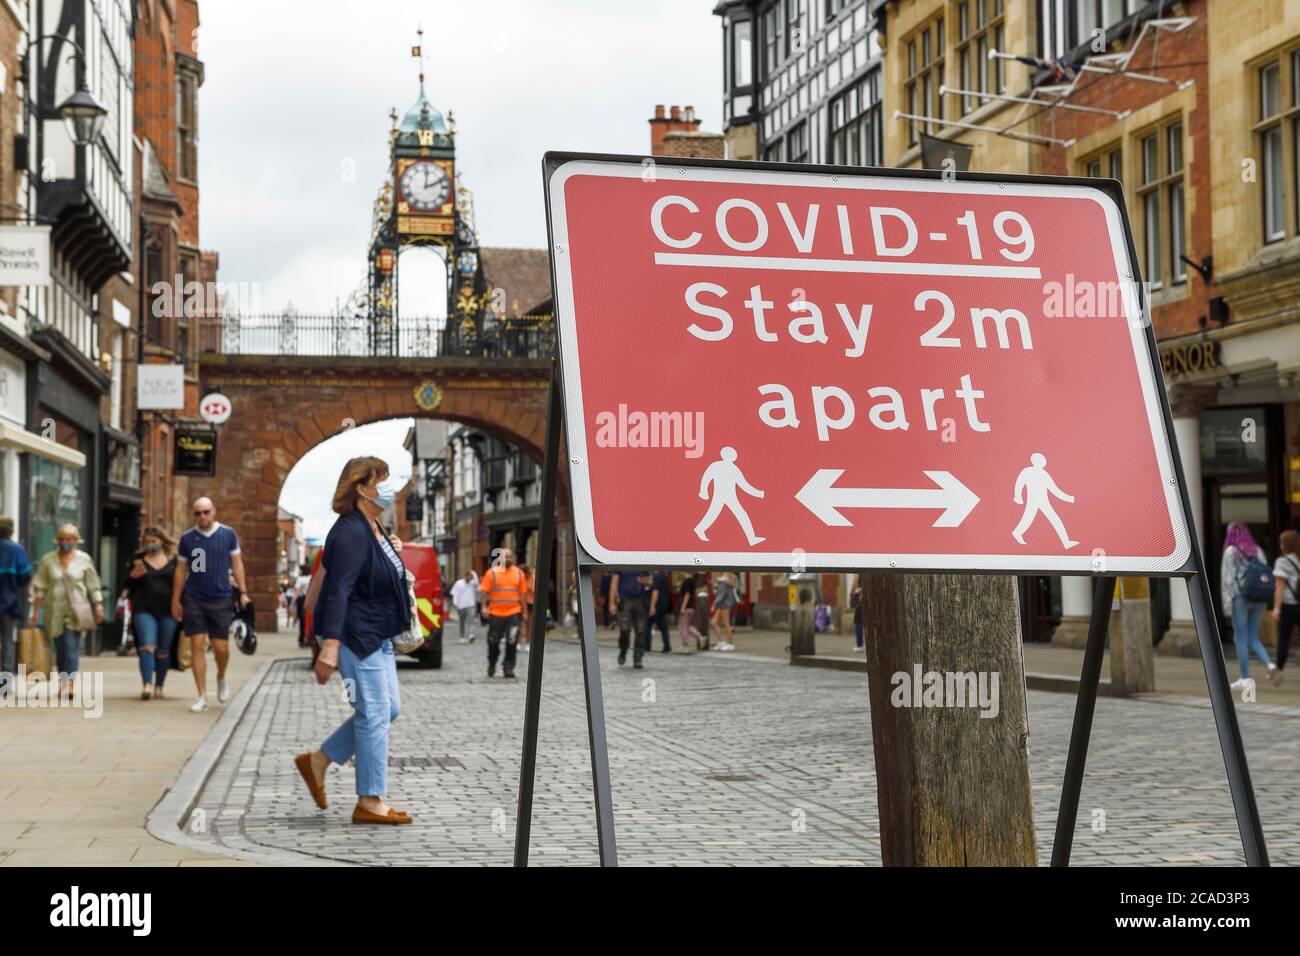 A COVID 19 sign in Chester city centre reminding people to stay 2m apart Stock Photo